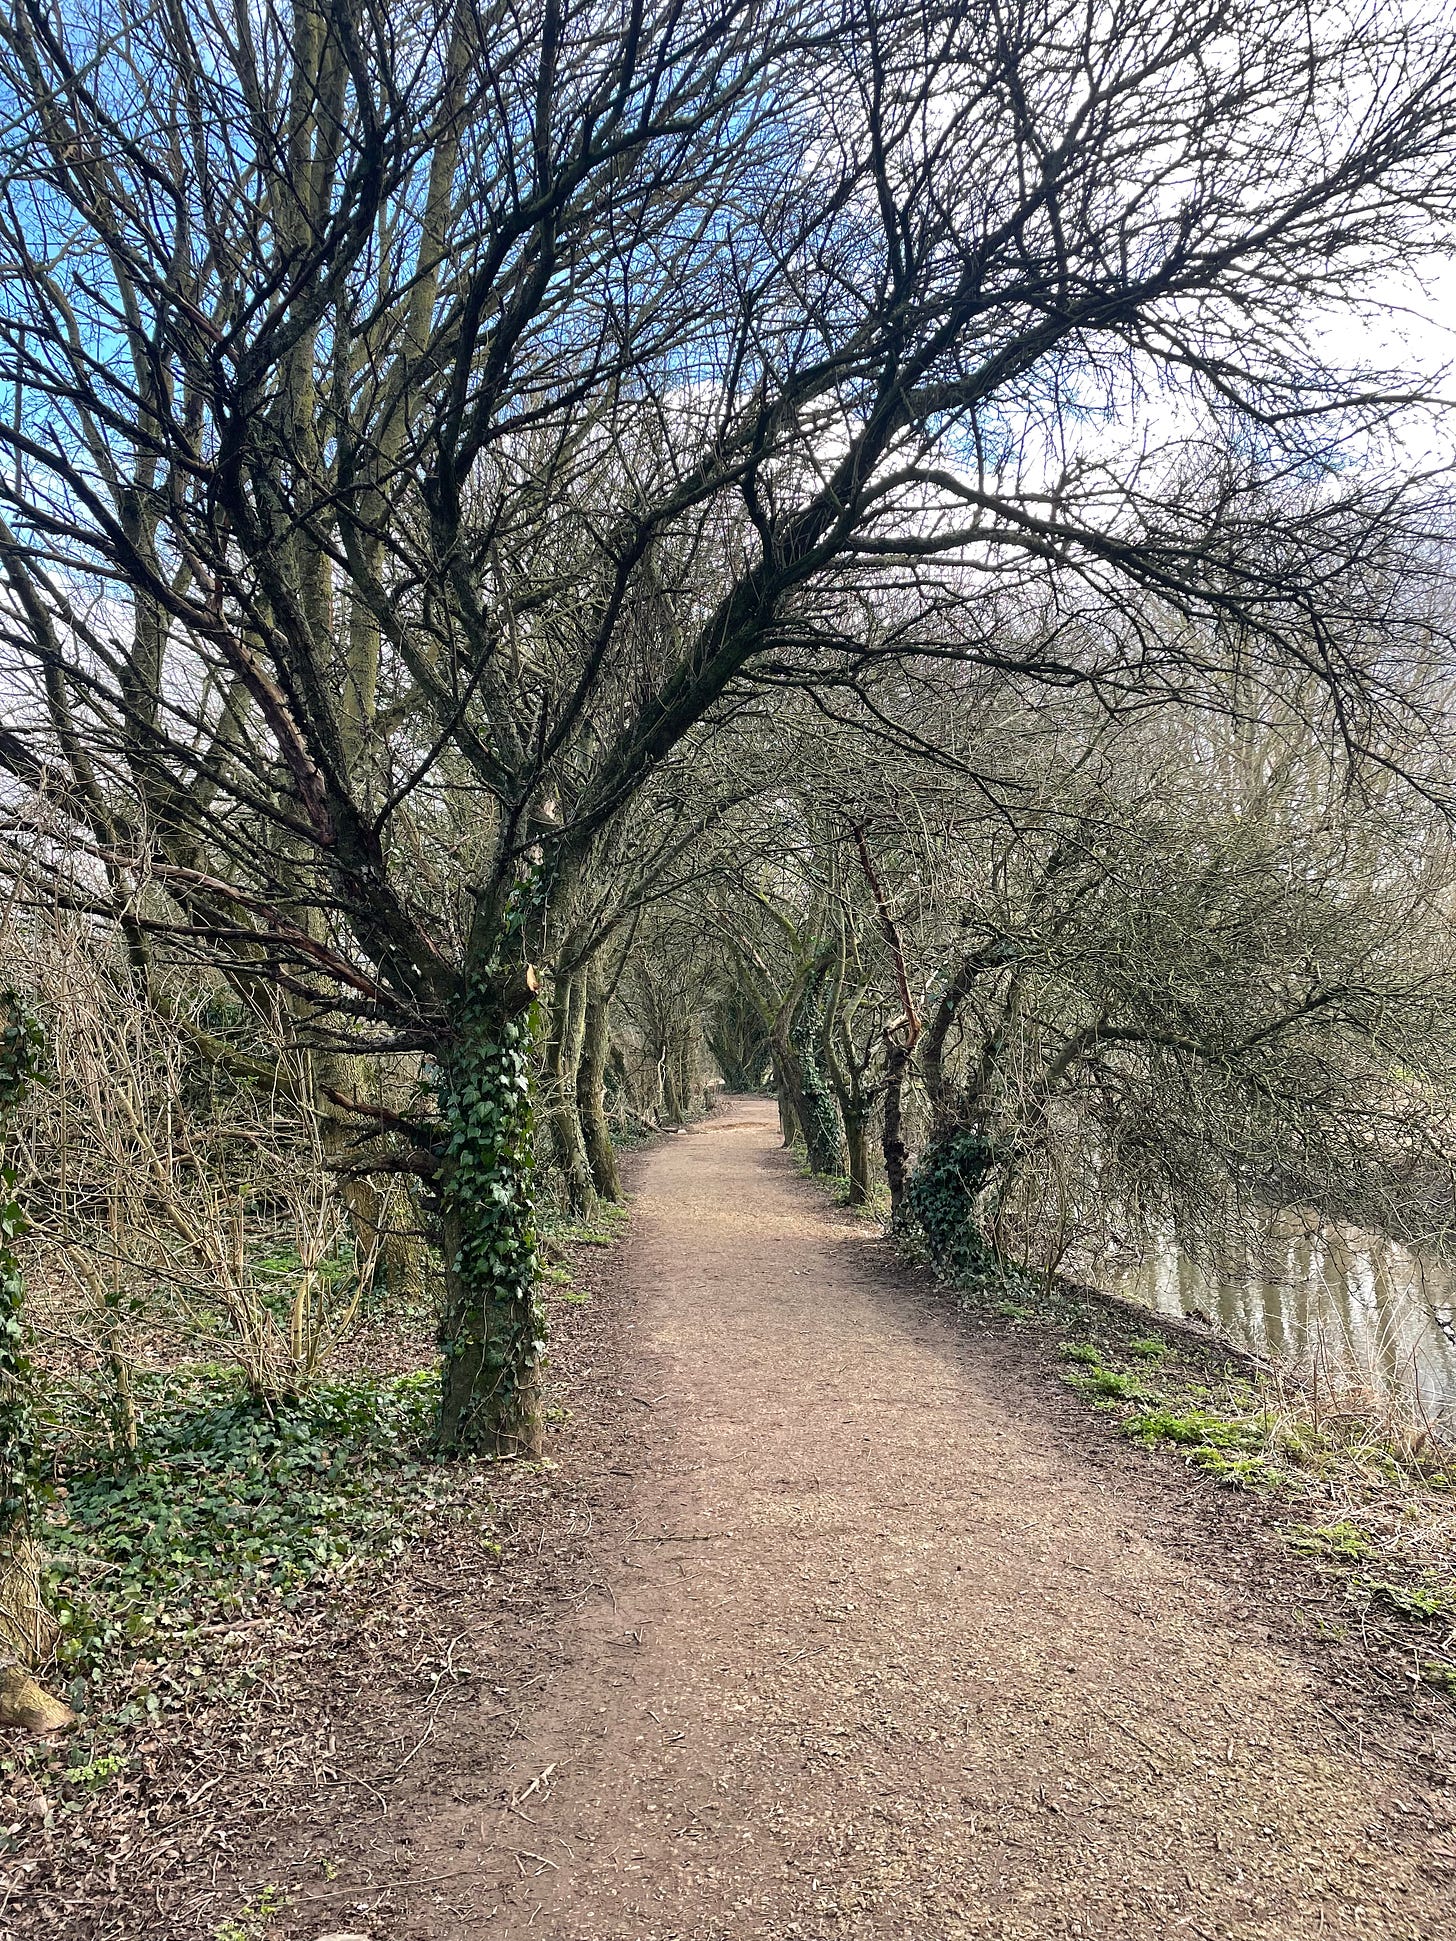 Trees overhanging a path